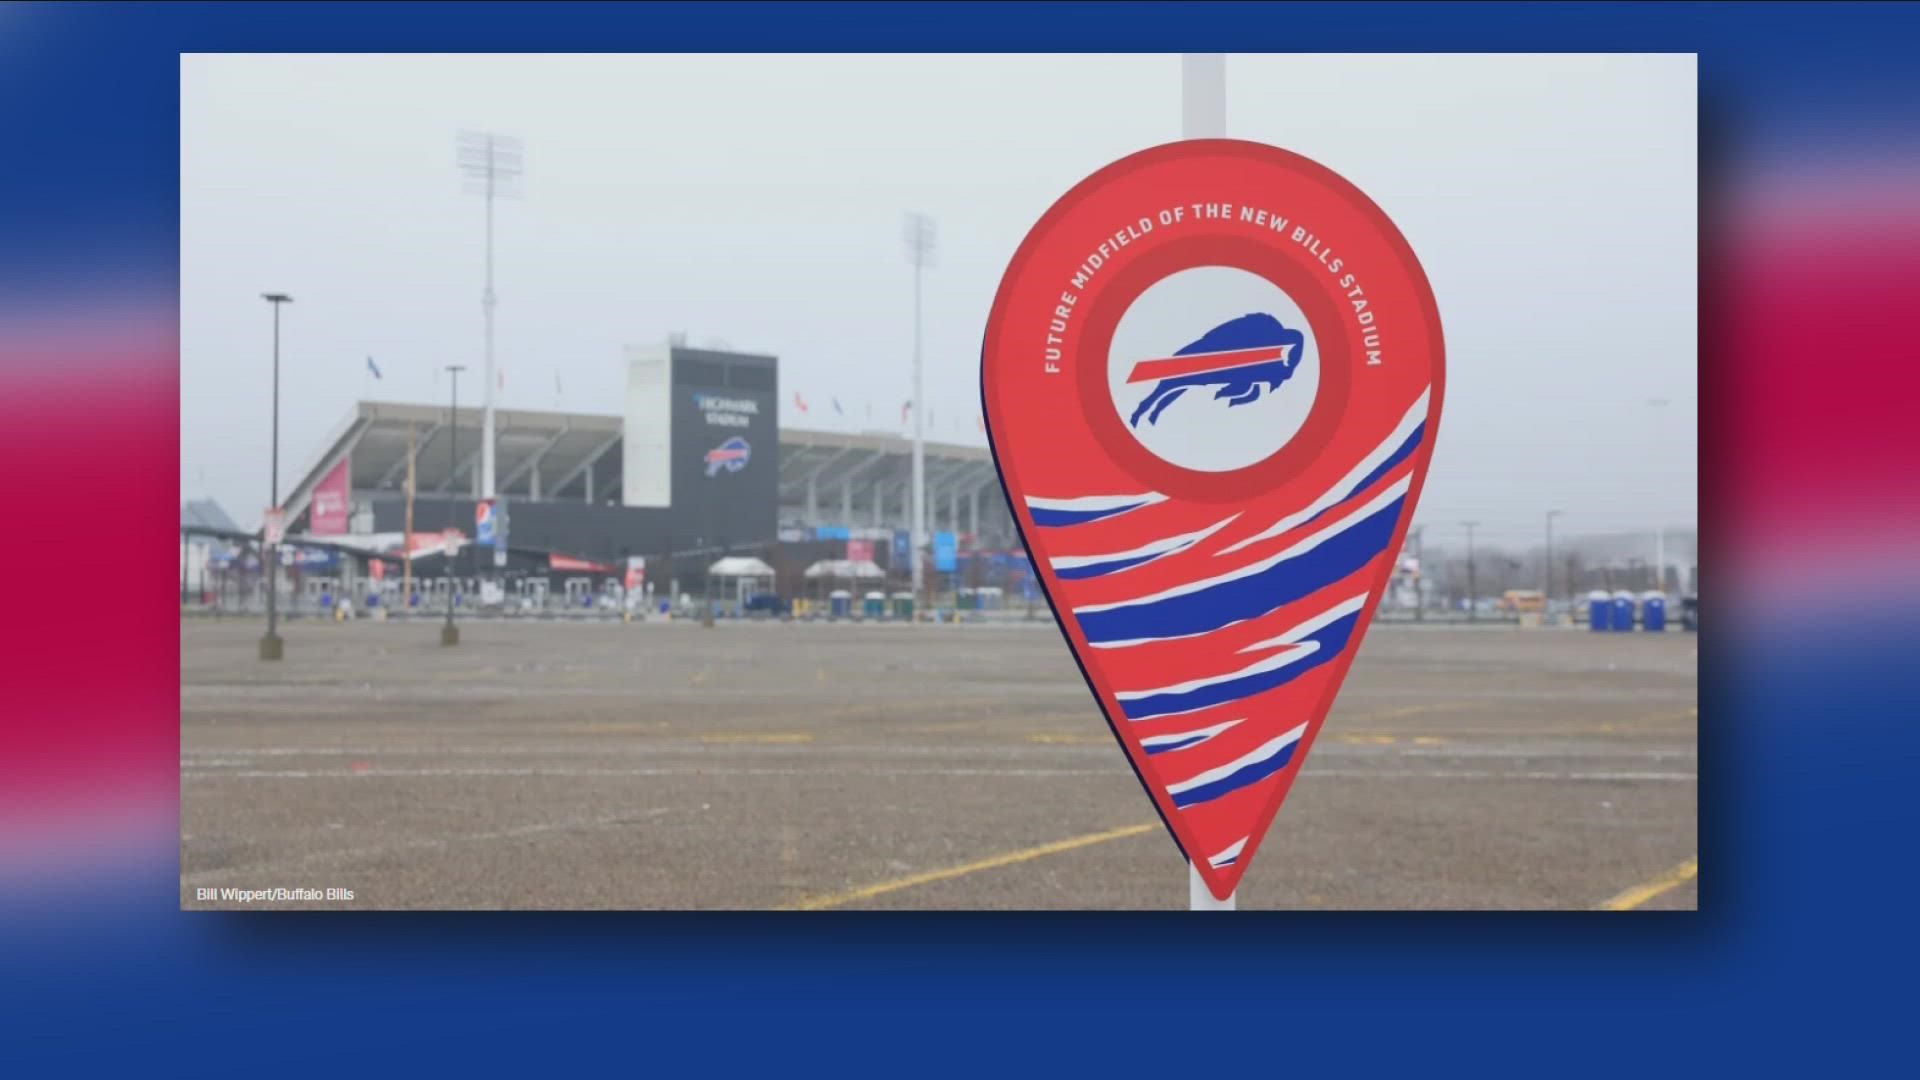 The Buffalo Bills have set up a midfield marker where the new field's 50-yard line.